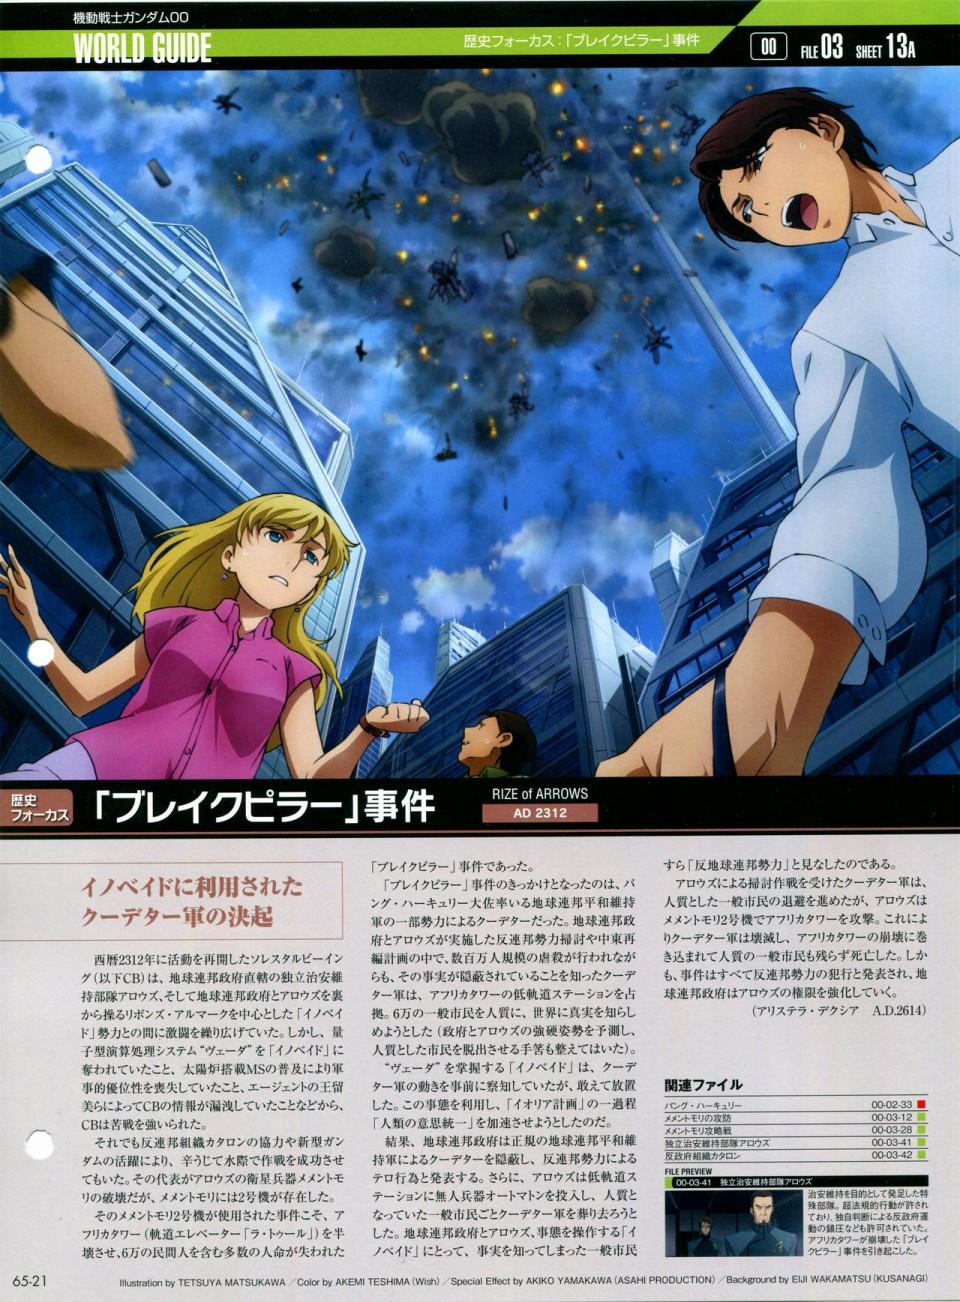 The Official Gundam Perfect File  - 第65-67話(1/3) - 1